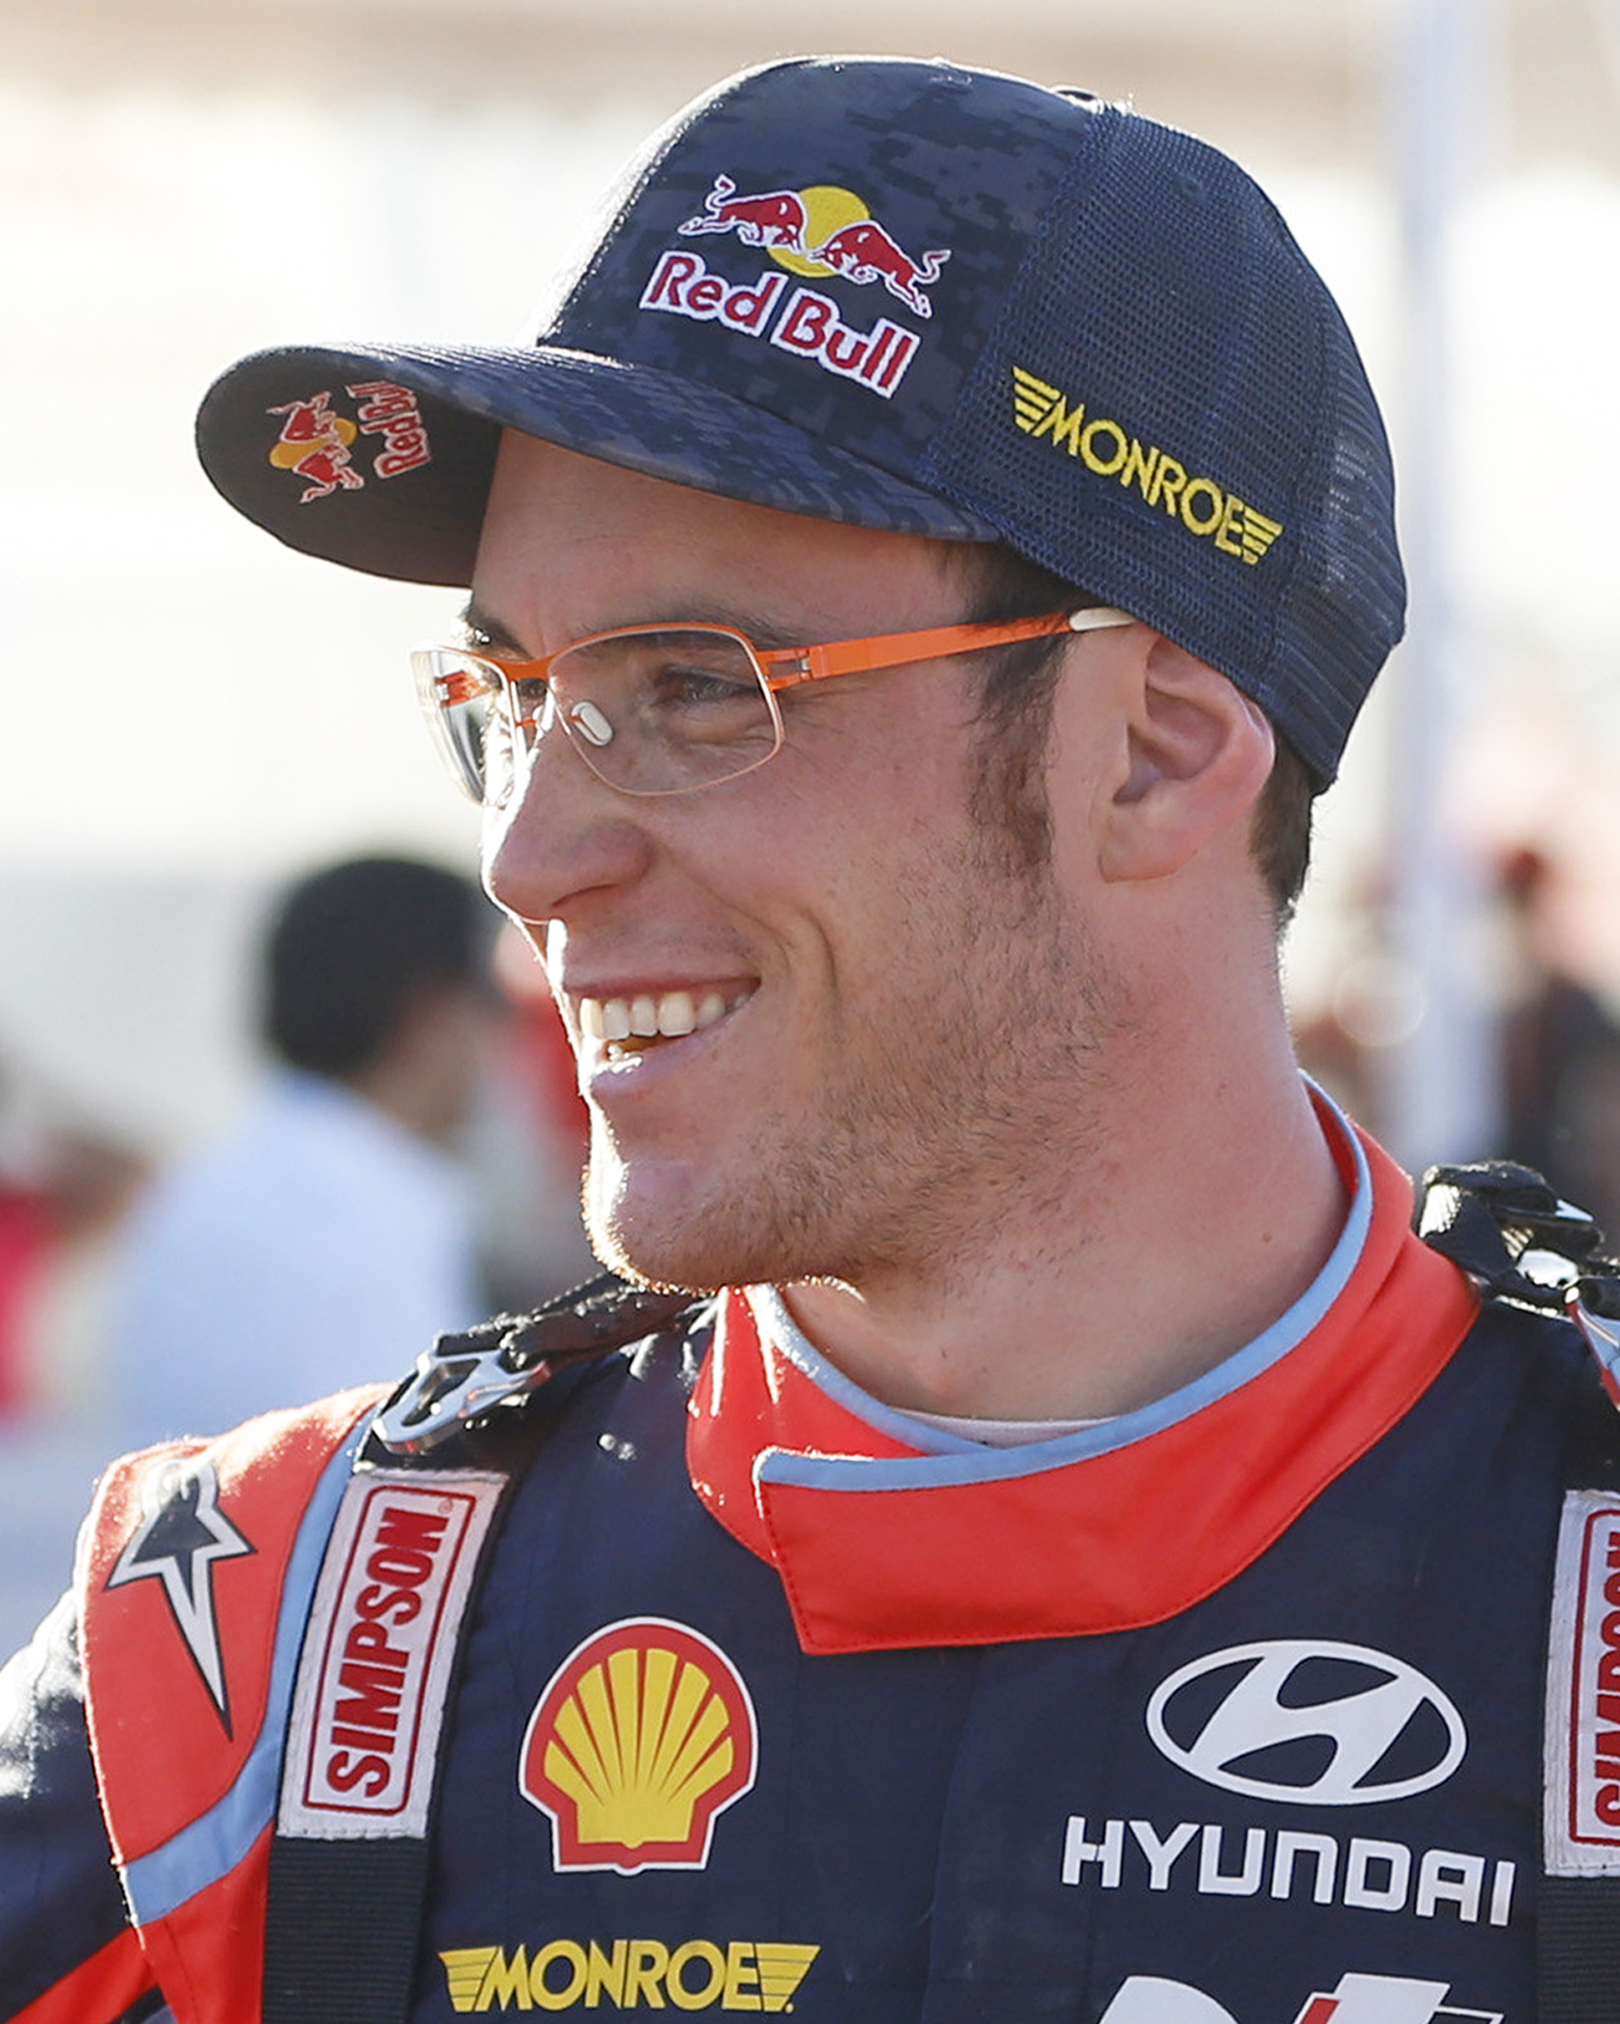 Rallying-World championship leader Neuville crashes out in Chile